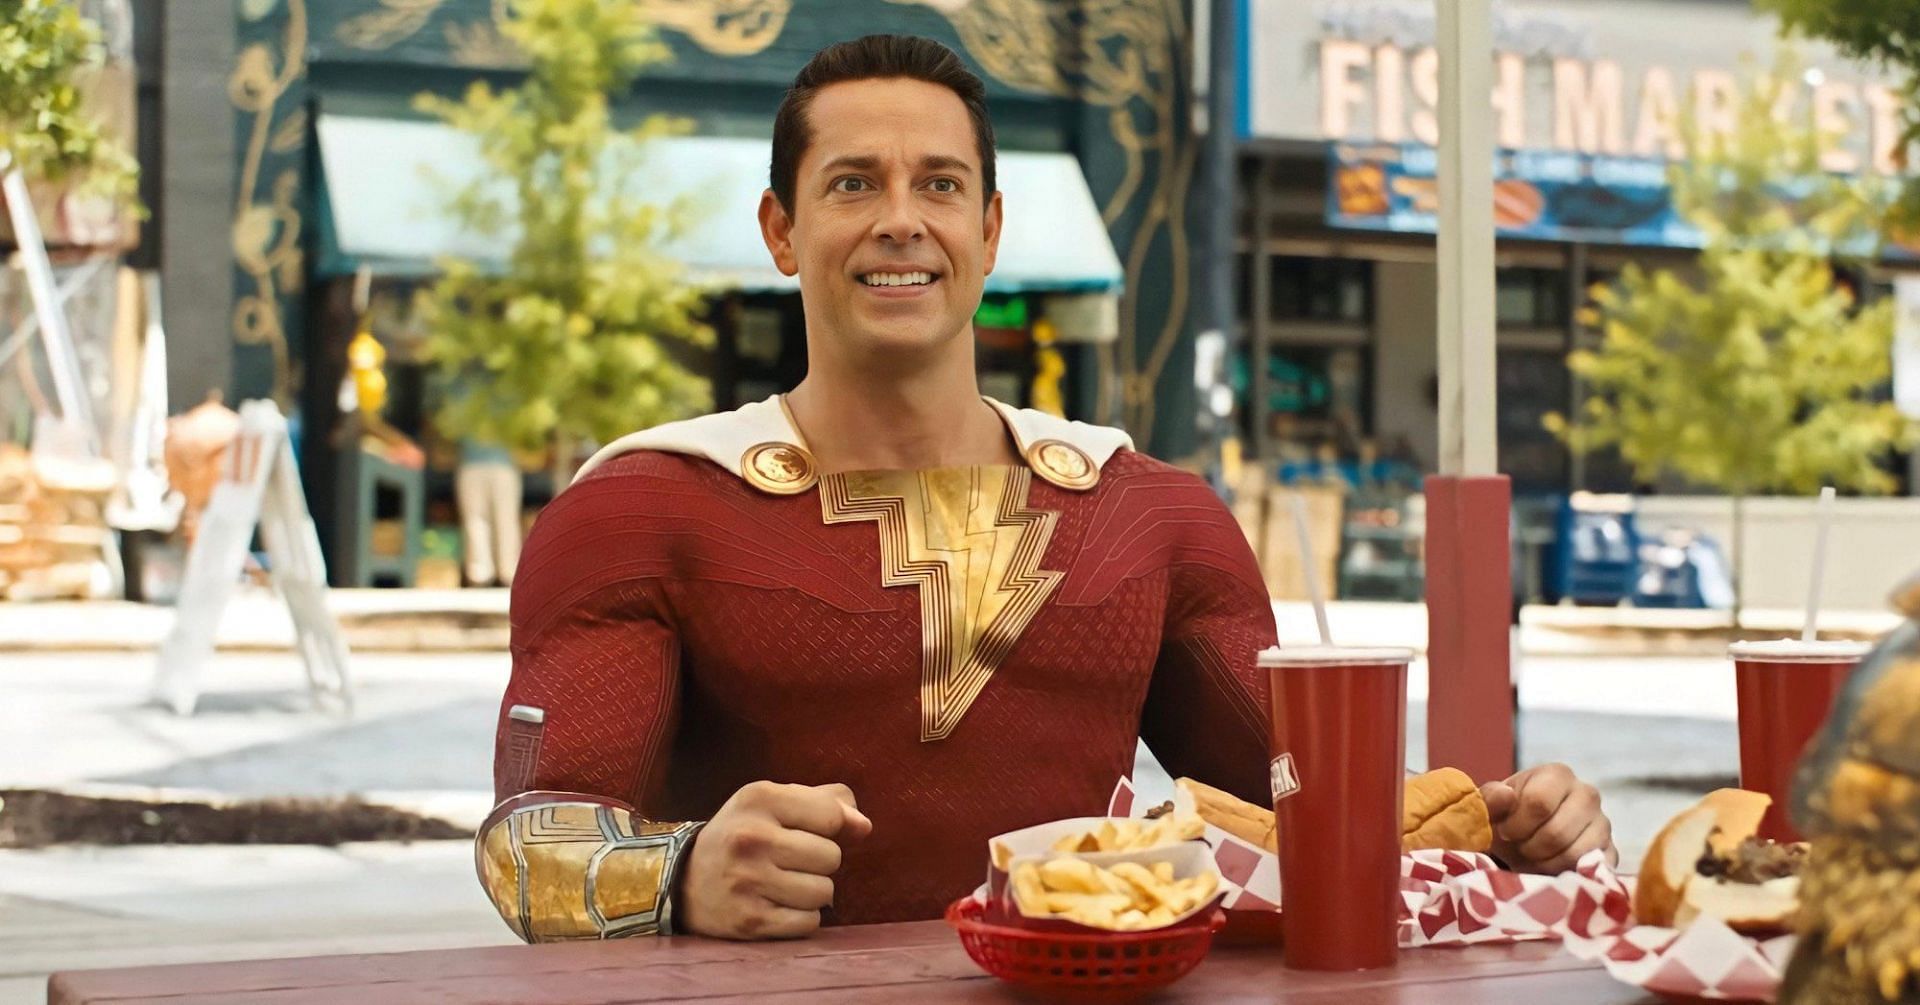 Shazam 2 is a MASSIVE Flop! Box Office WORSE Than Predicted!